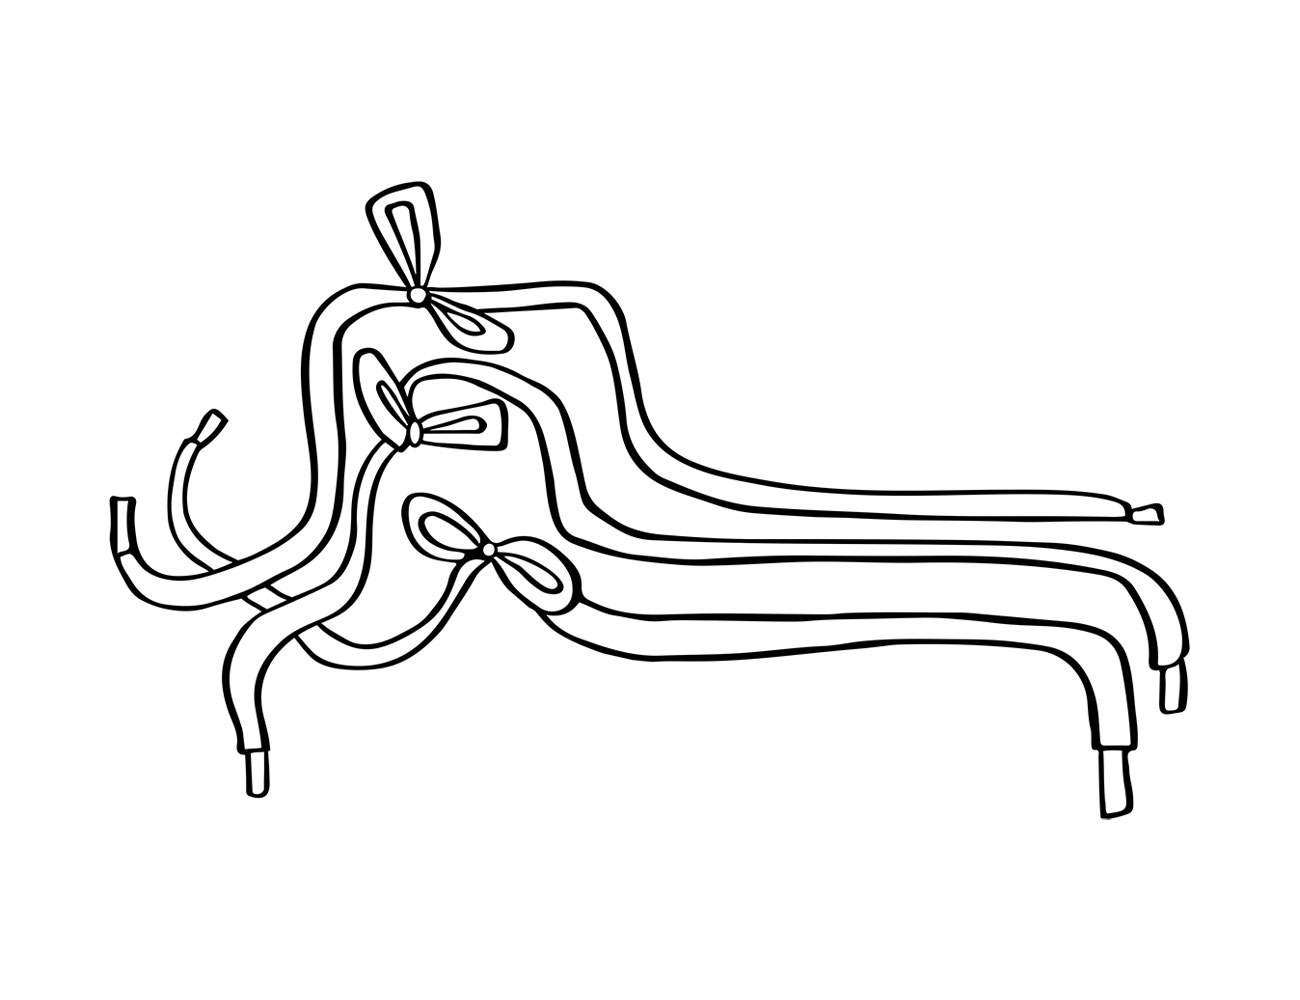 Shoe drawing six: three shoelaces stacked on each other, mimicking the shape of a shoe.